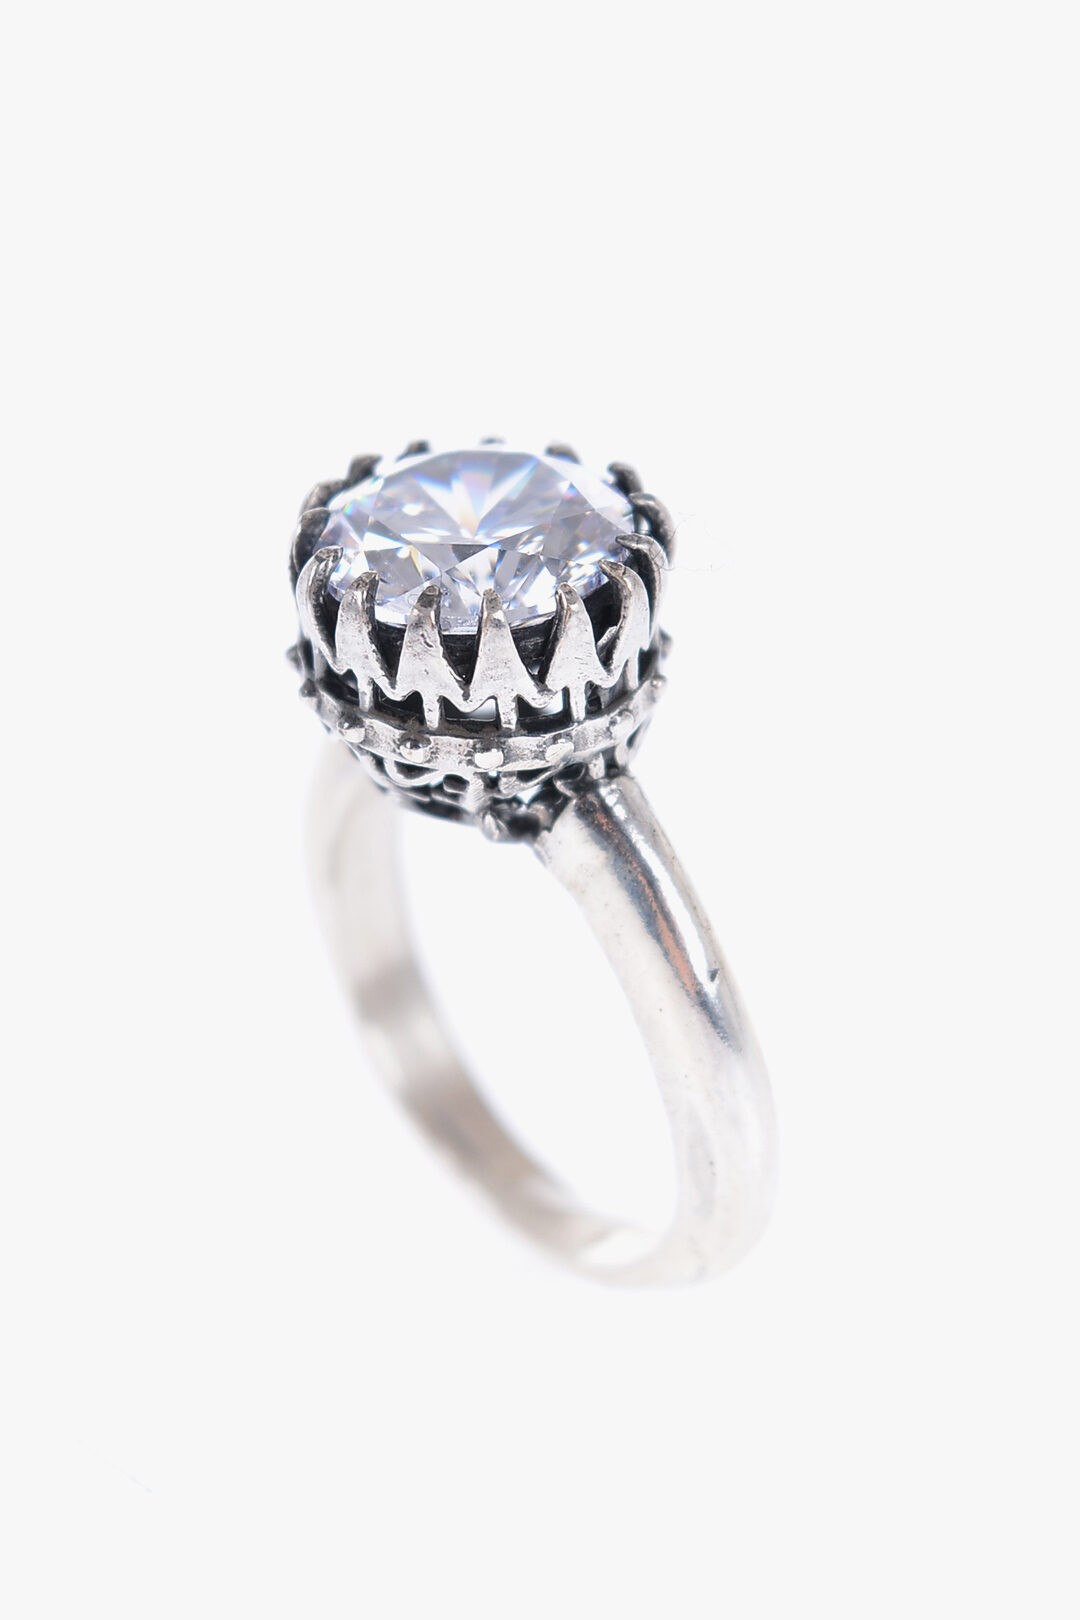 QUINTO EGO キュントゥ エゴ ジュエリー AN301 BIANCO レディース SILVER KING RING WITH ZIRCON 【関税・送料無料】【ラッピング無料】 dk